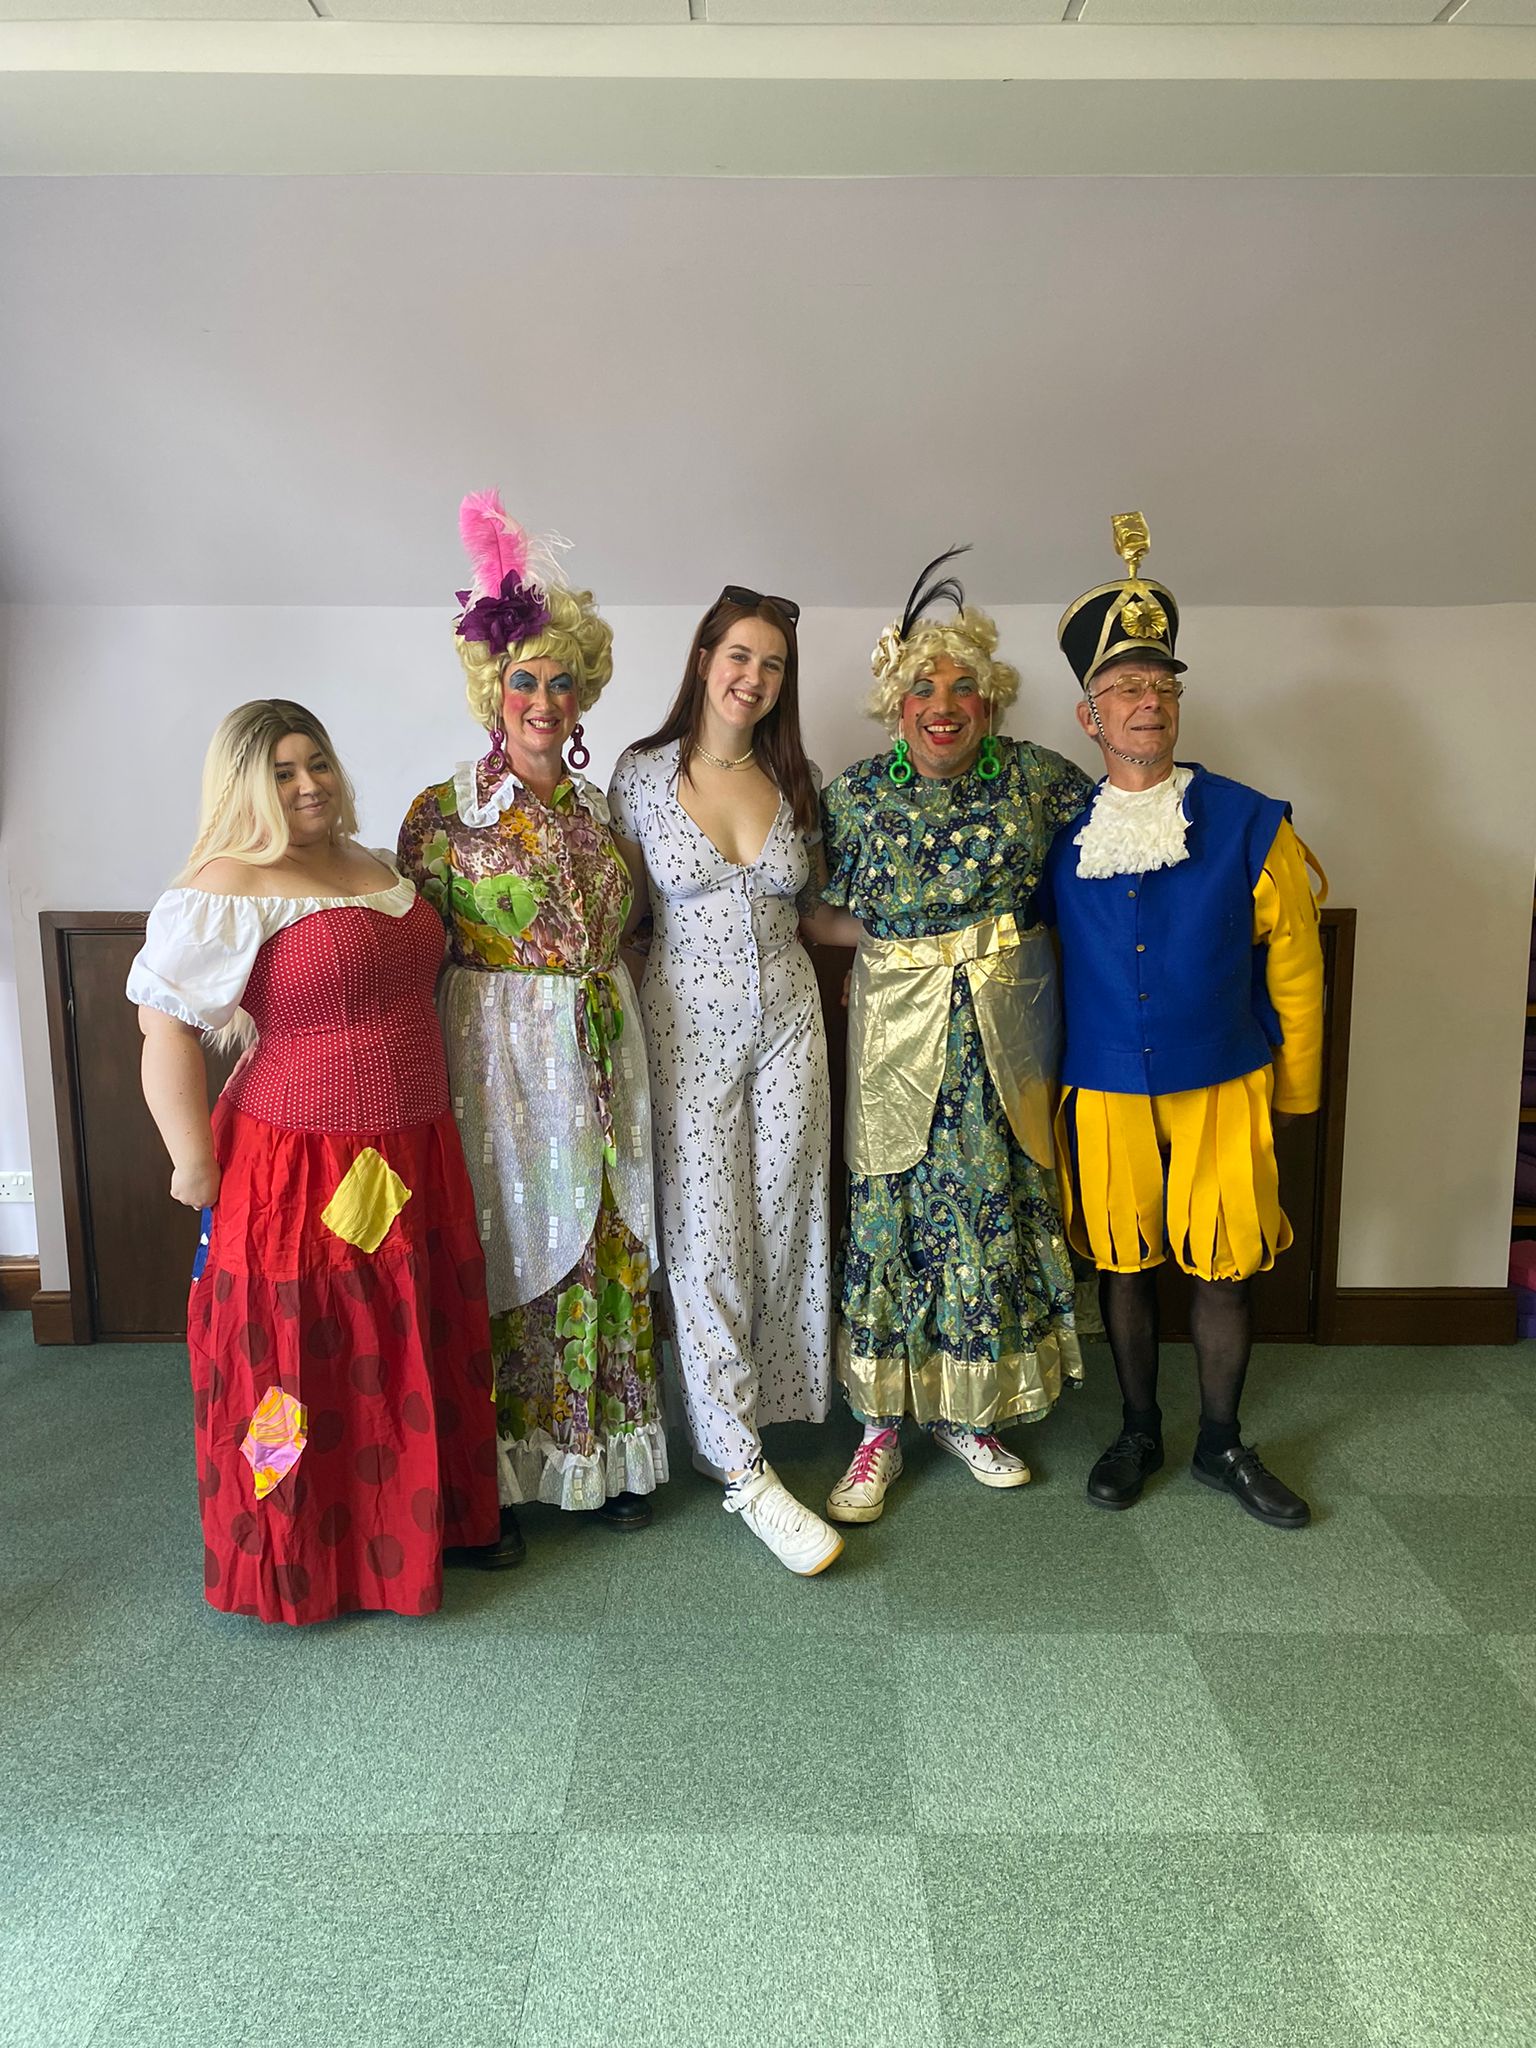 A group photo of some of the cast. Left to right, Cinderella, an Ugly Sister, Our Director, an Ugly Sister and Baron Hardup